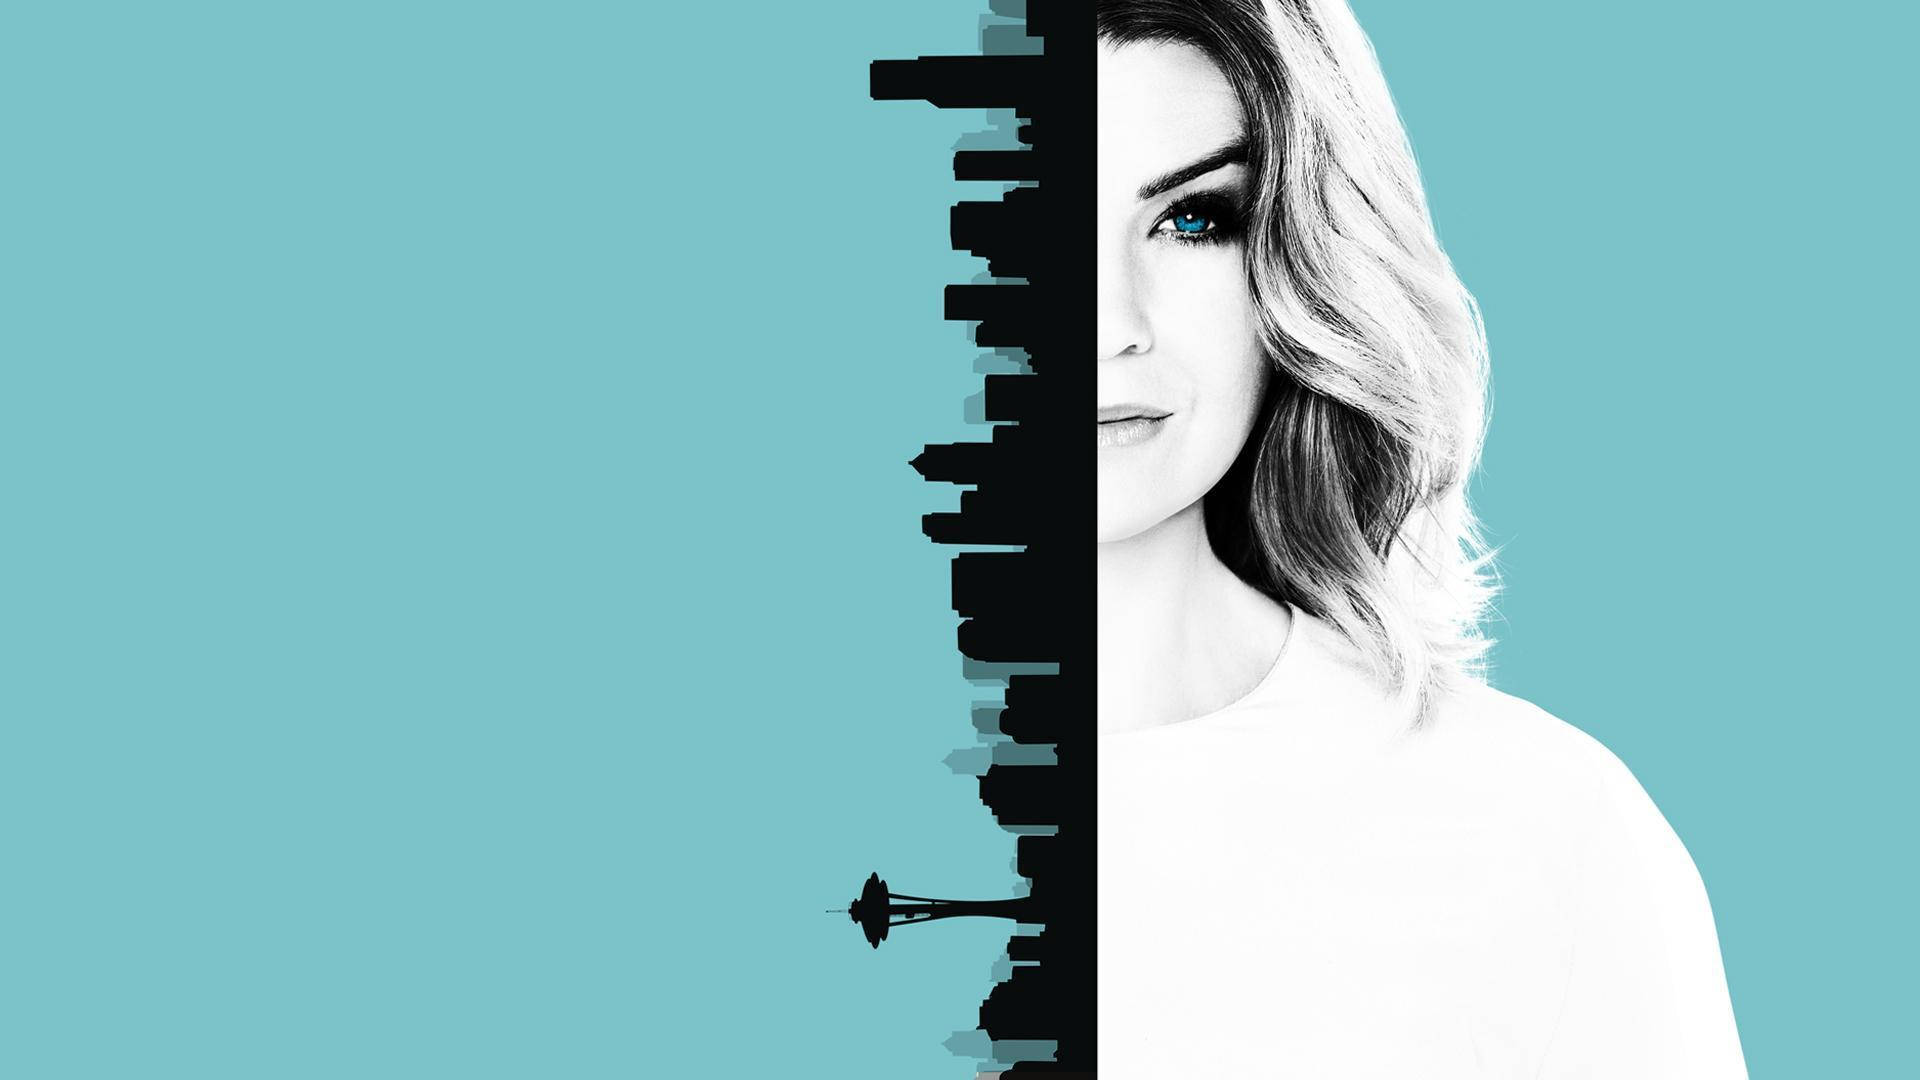 Grey's Anatomy Teal Poster